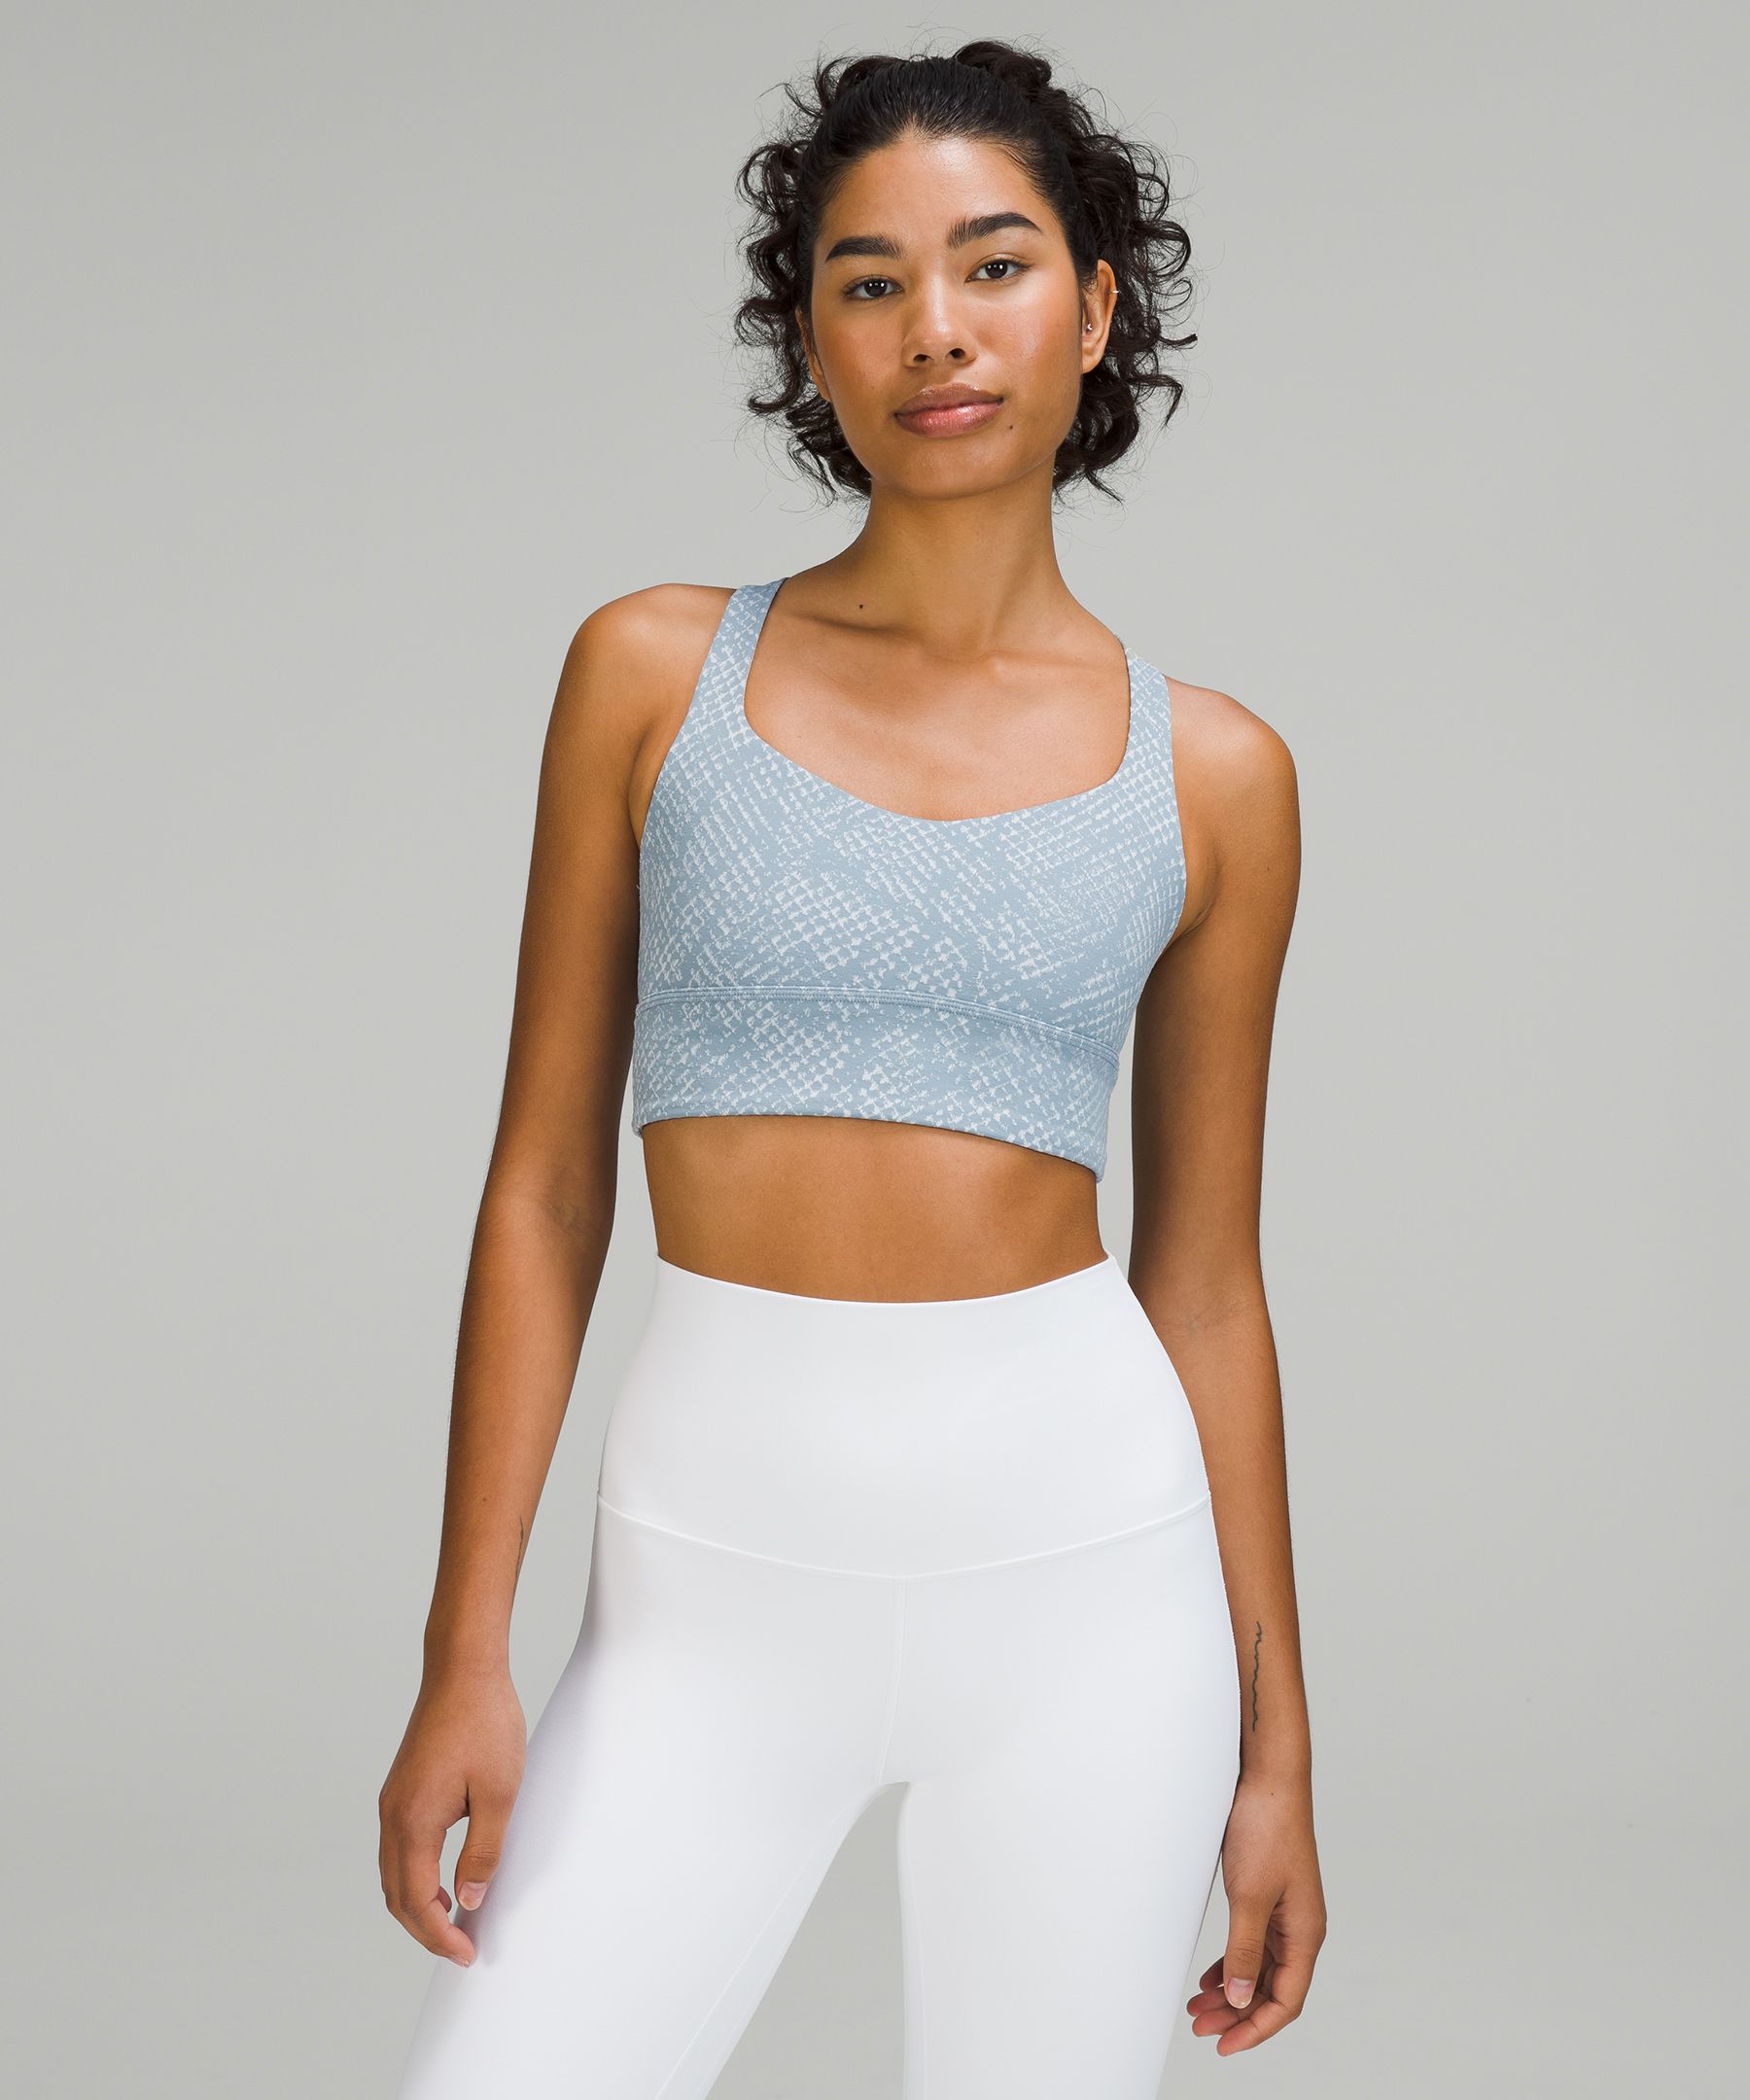 Lululemon Wild Light Support, A/b Cup In Reptilia Jacquard Chambray Starlight